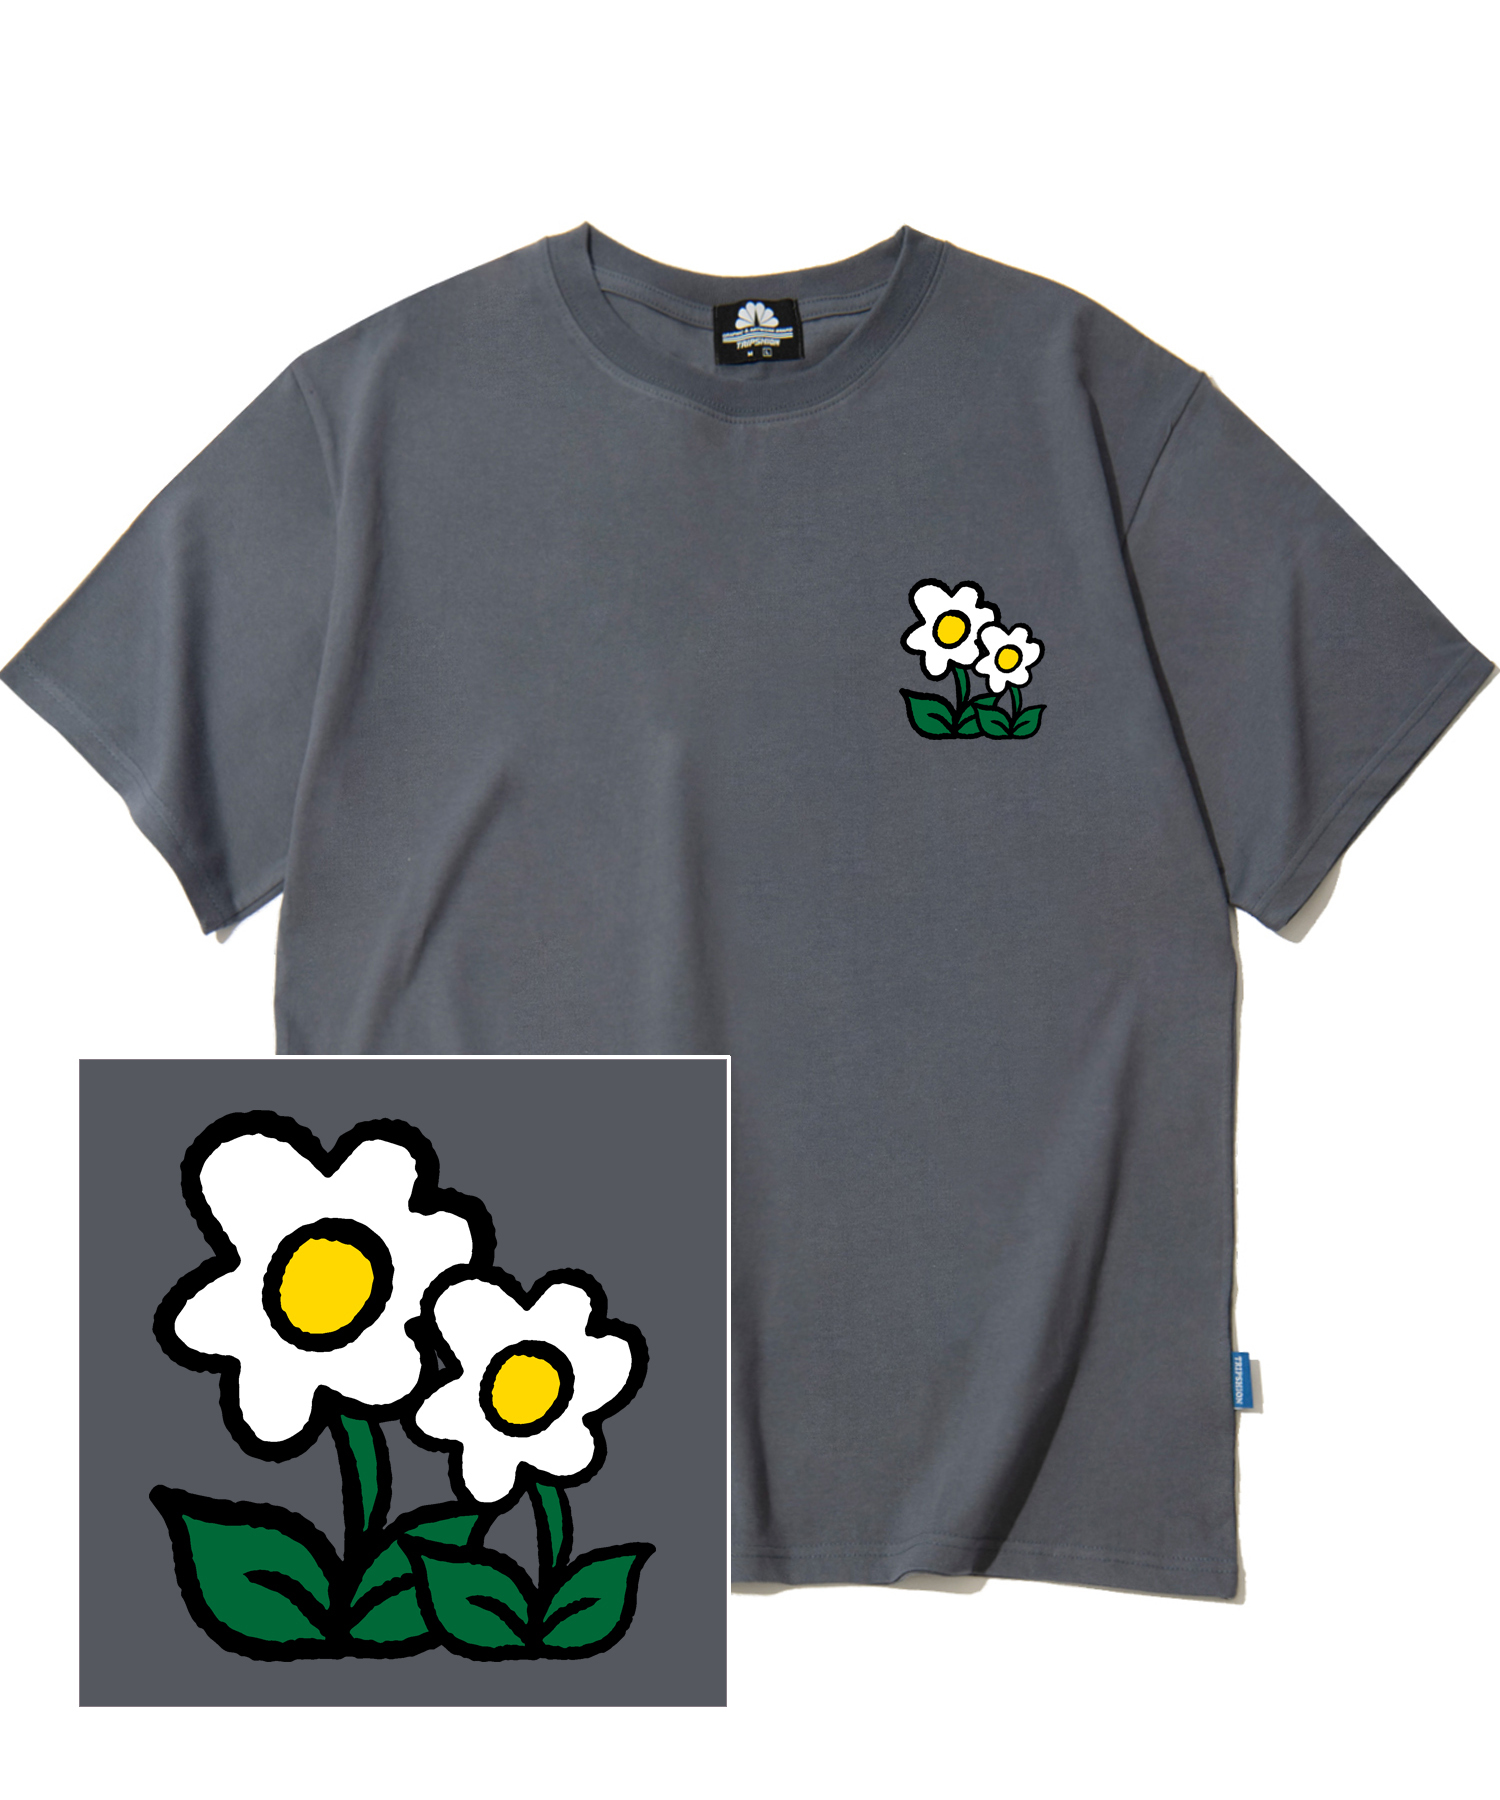 DOUBLE FLOWER LOGO T-SHIRTS - GRAY